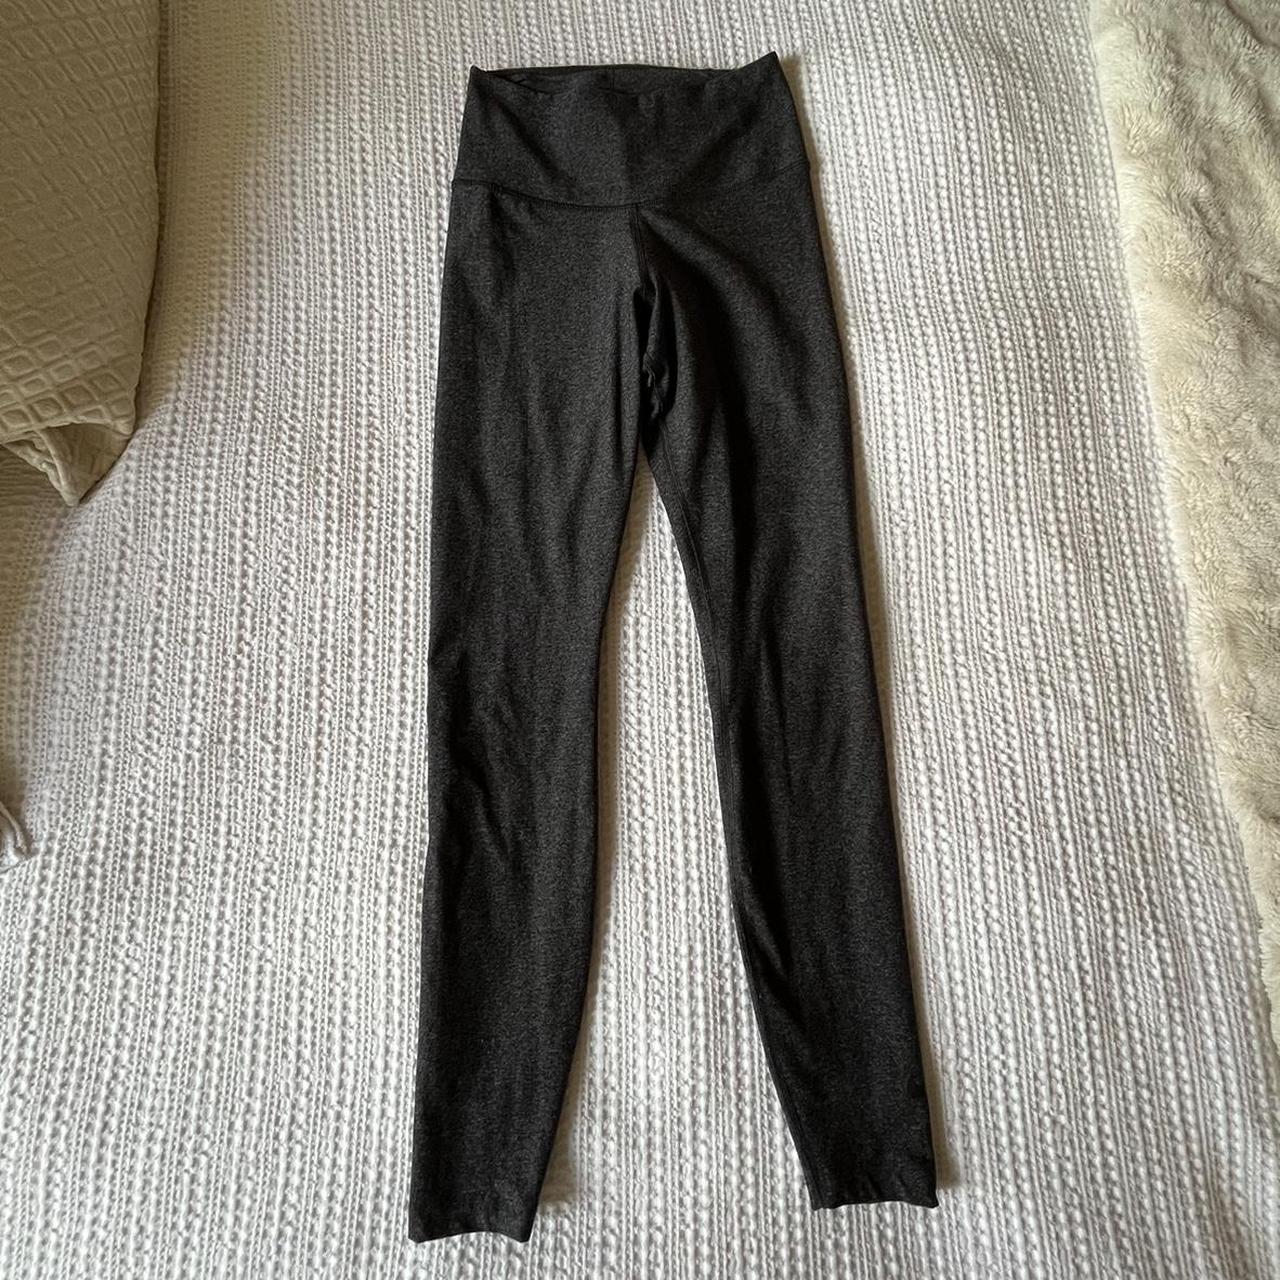 Nike Leggings! Size XS and in perfect condition. - Depop